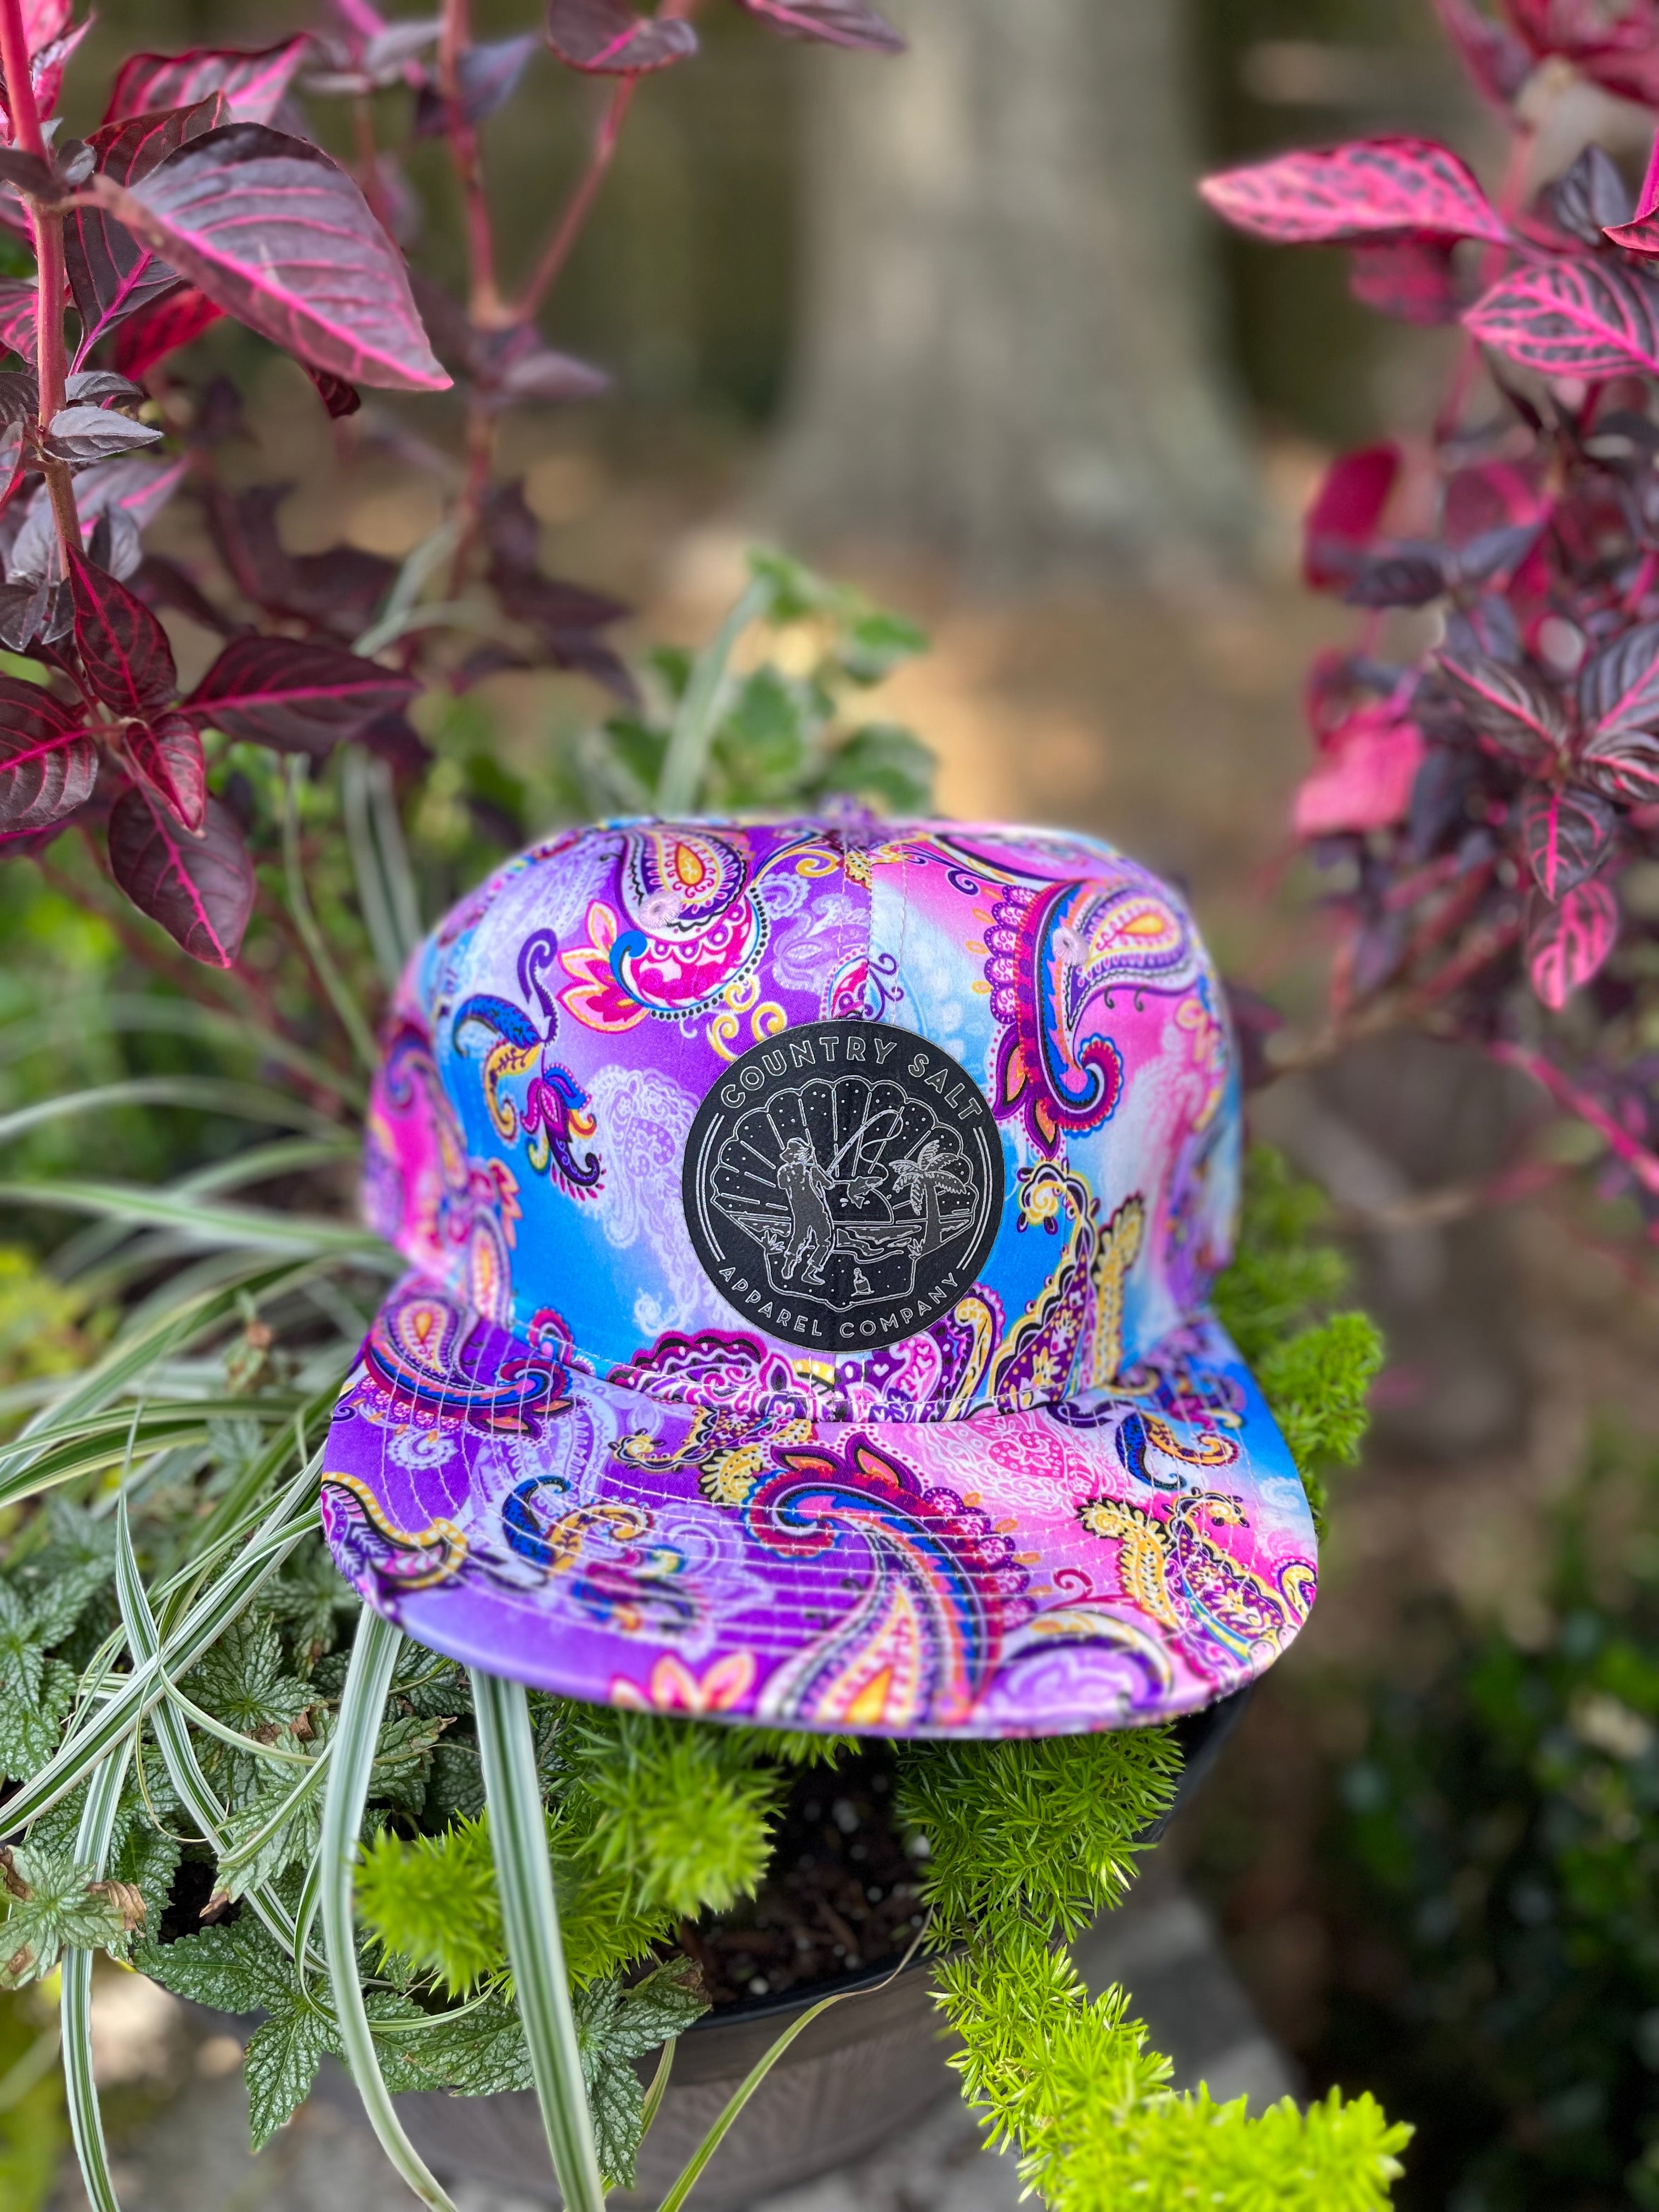 The "Paisley" Hat Collection